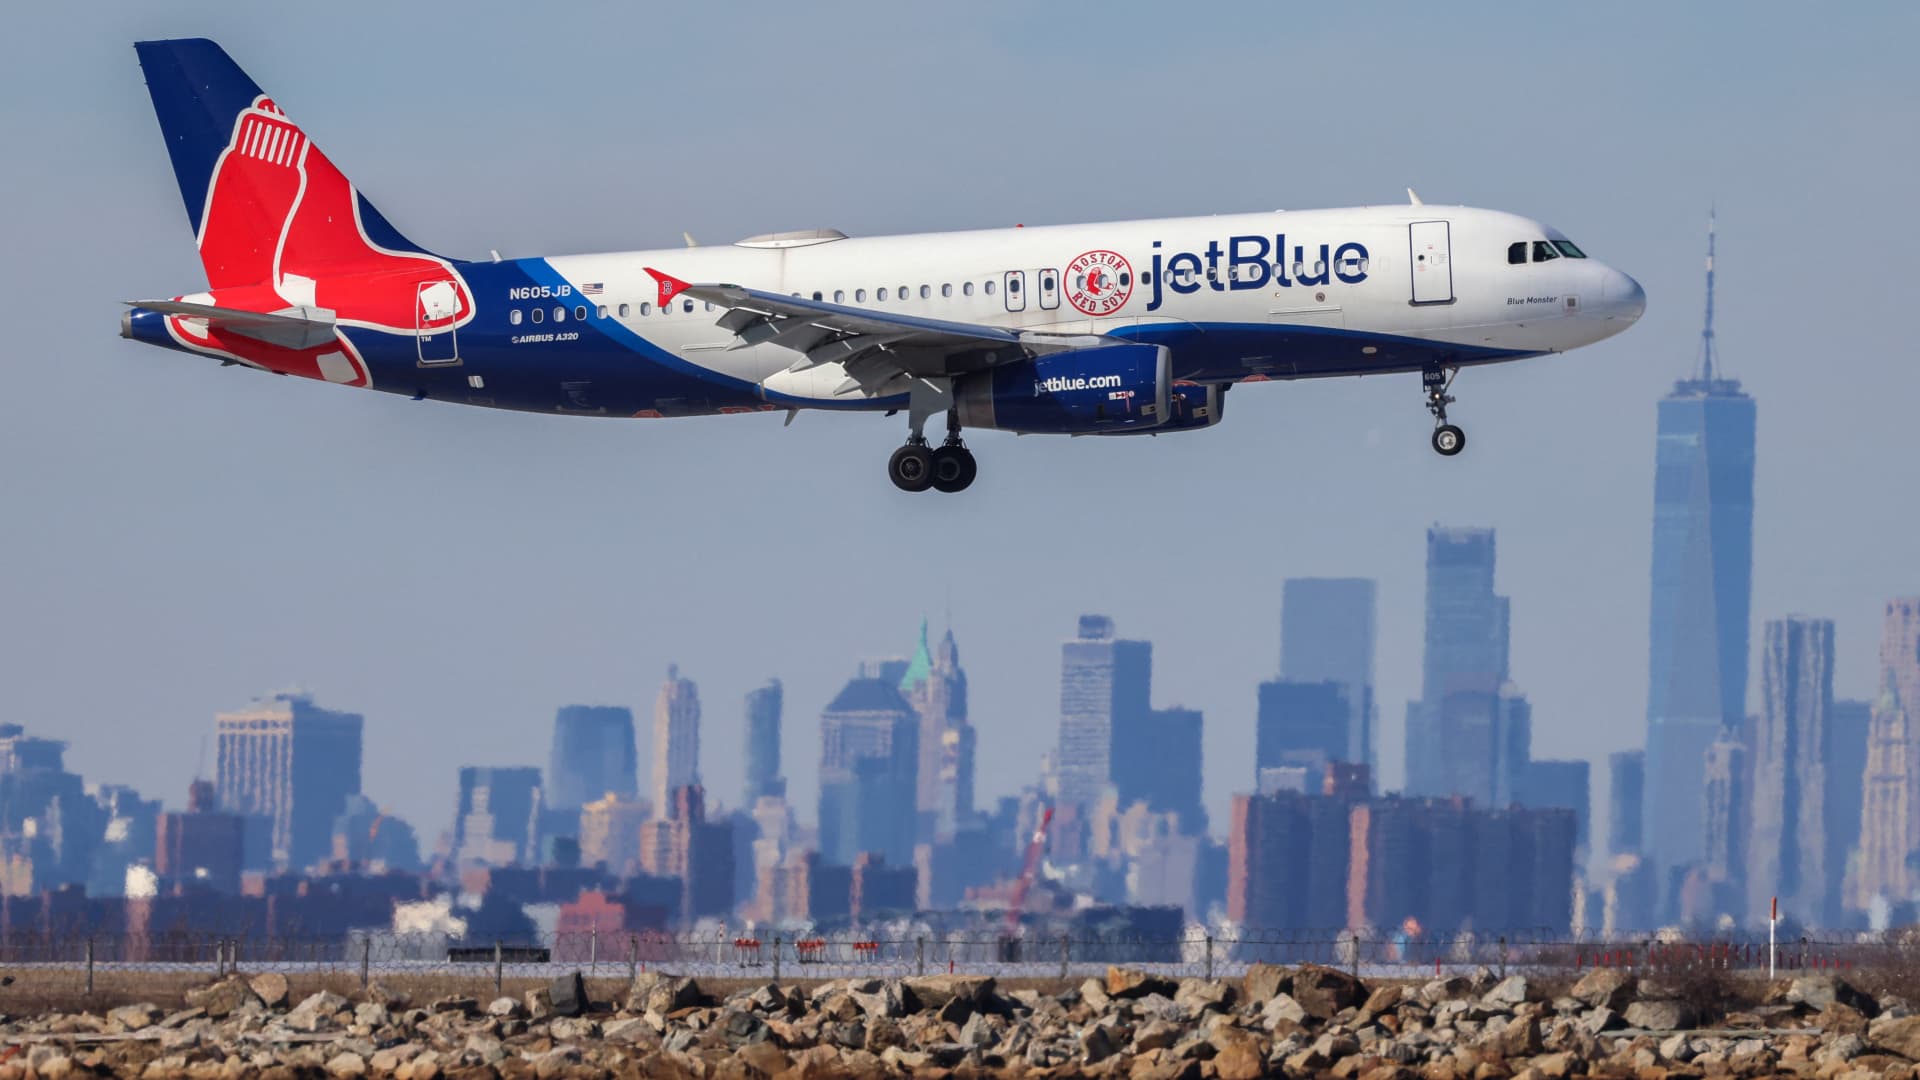 Stocks making the biggest moves midday: JetBlue Airways, Shopify, Biogen and more